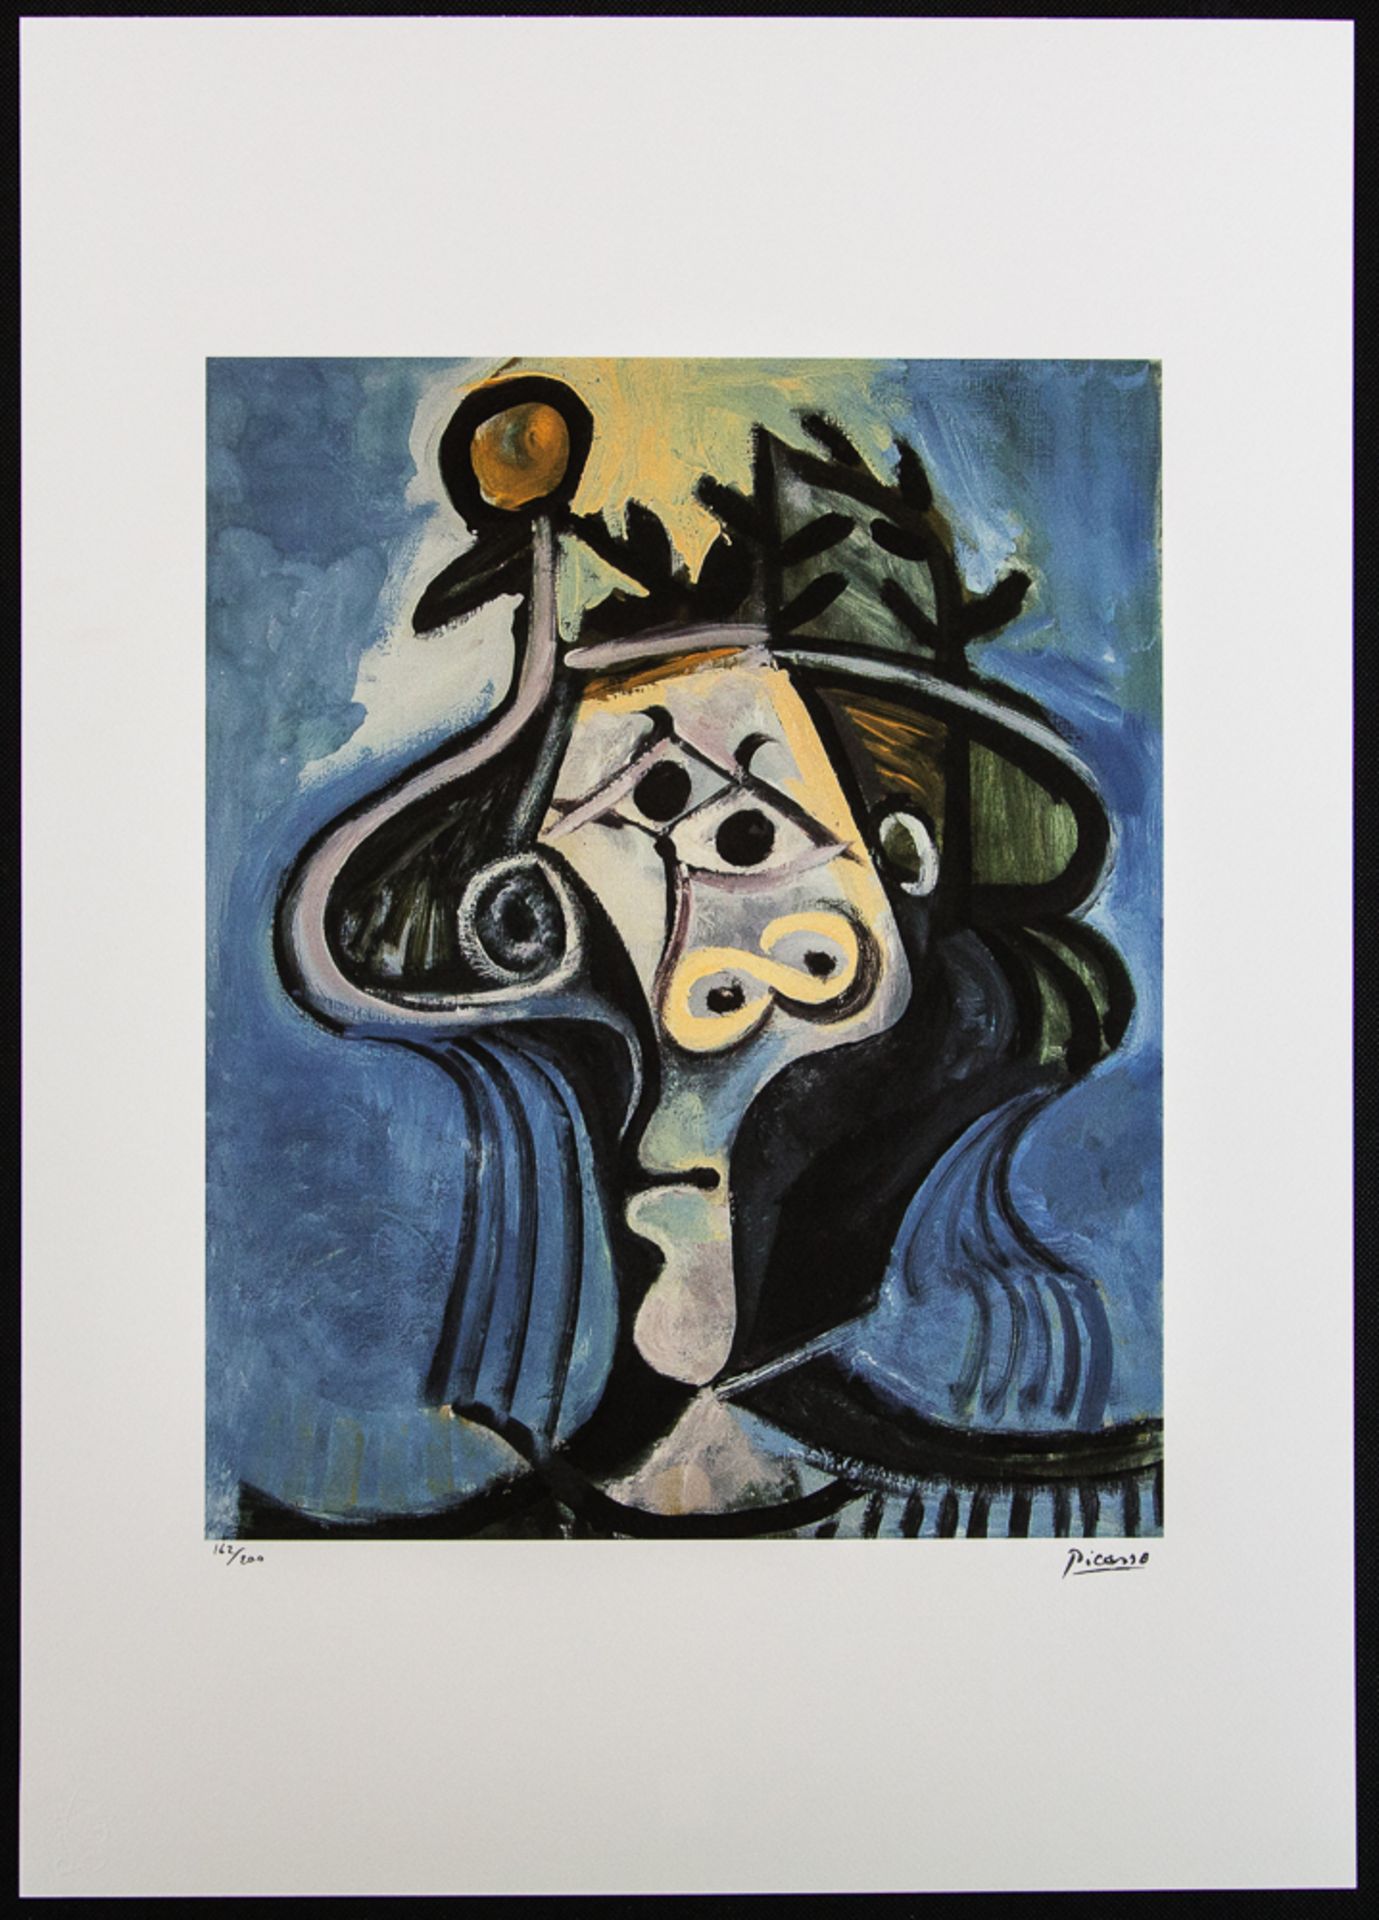 Pablo Picasso 'Woman' - Image 2 of 6